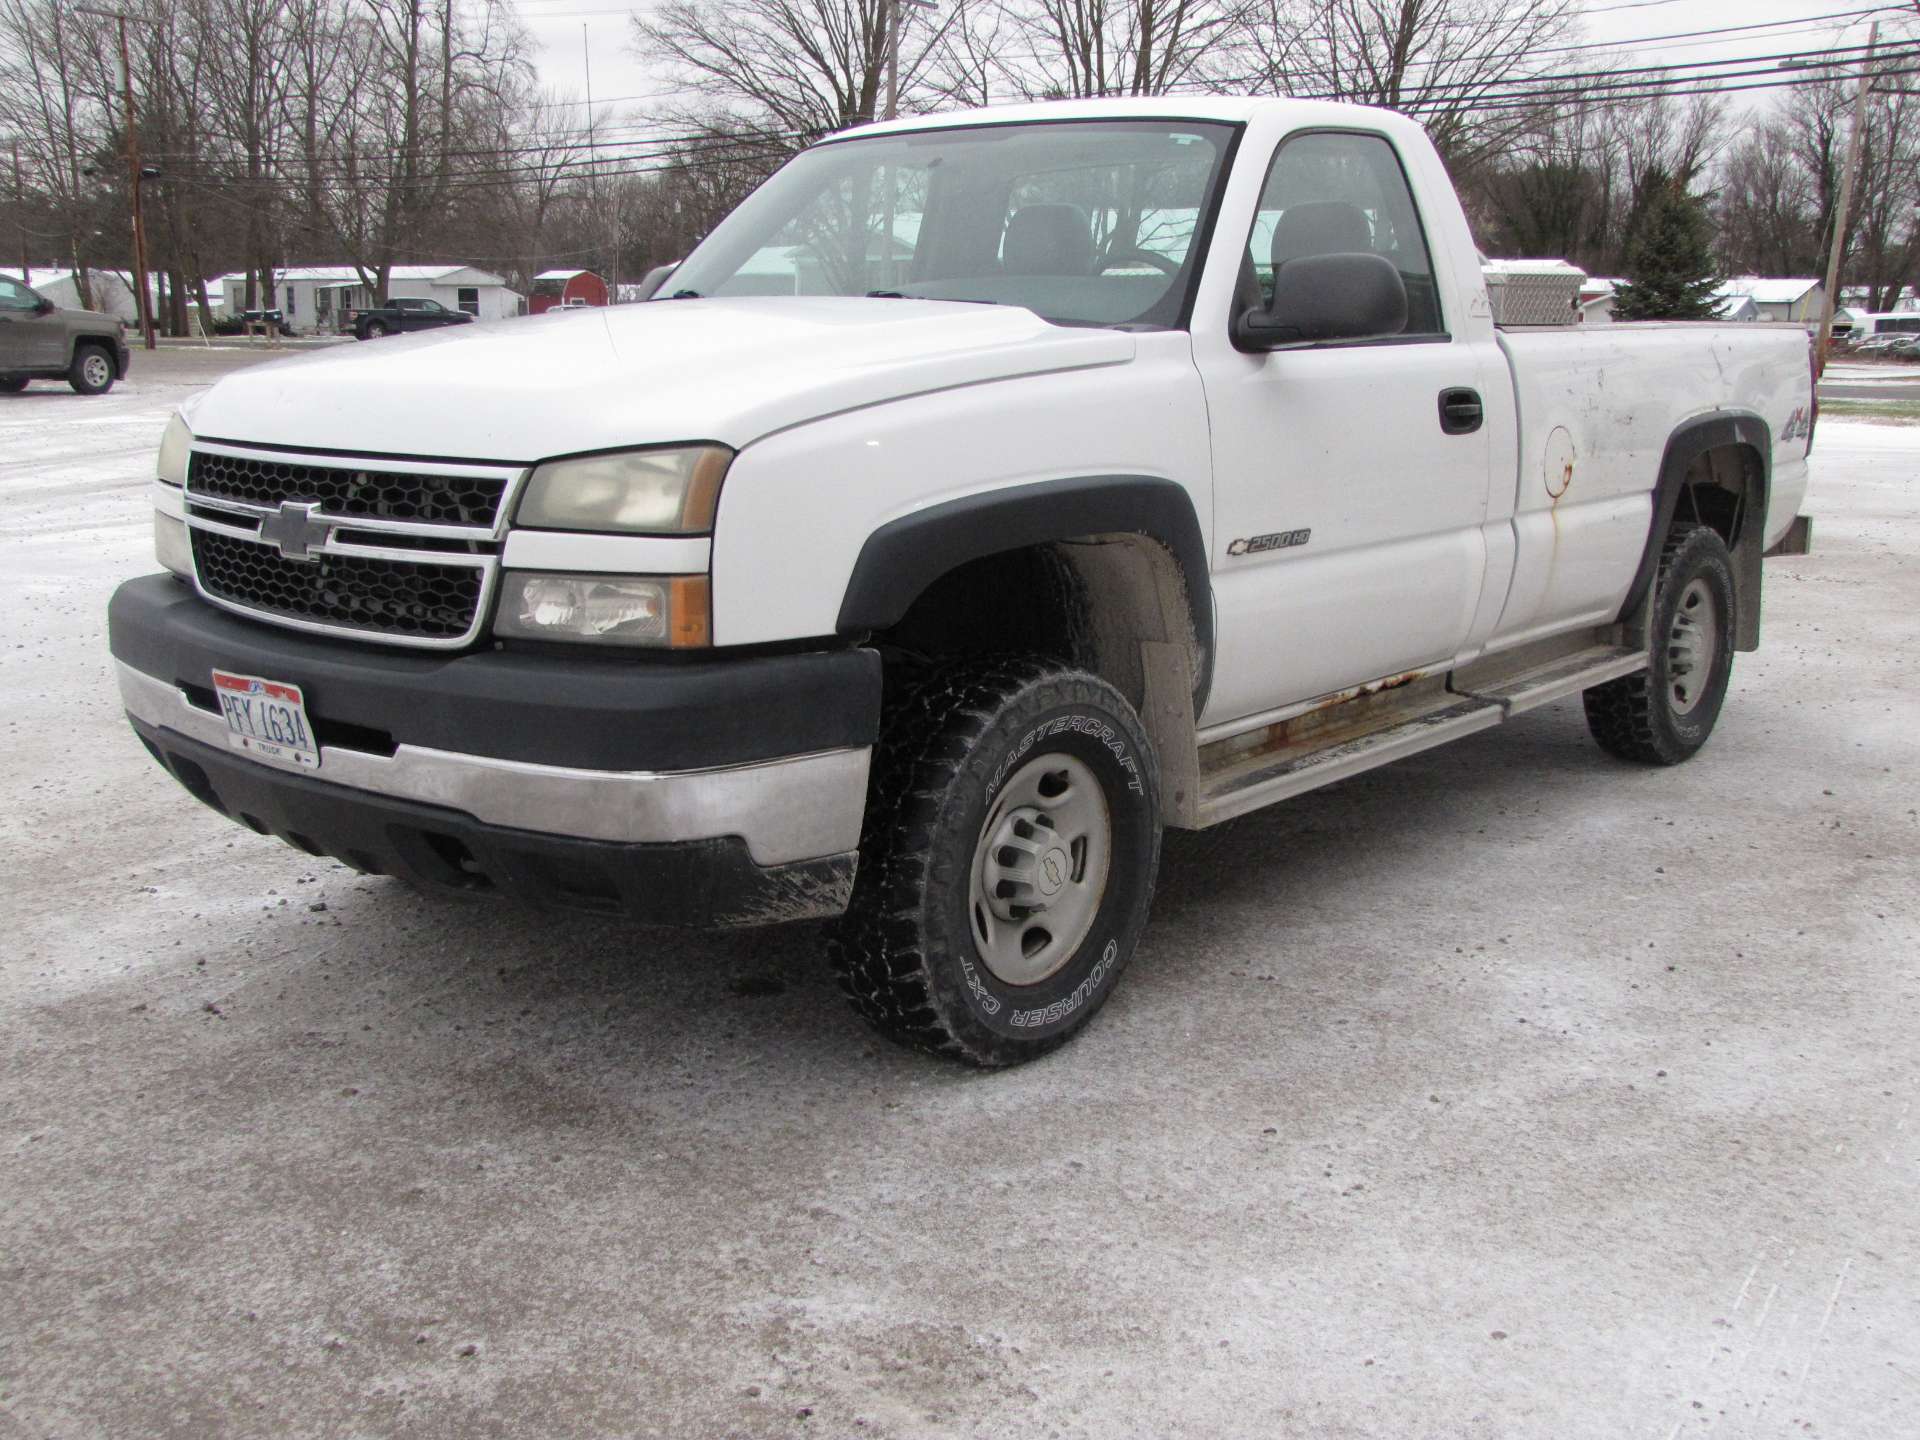 2006 Chevy 2500 HD pickup truck - Image 16 of 63